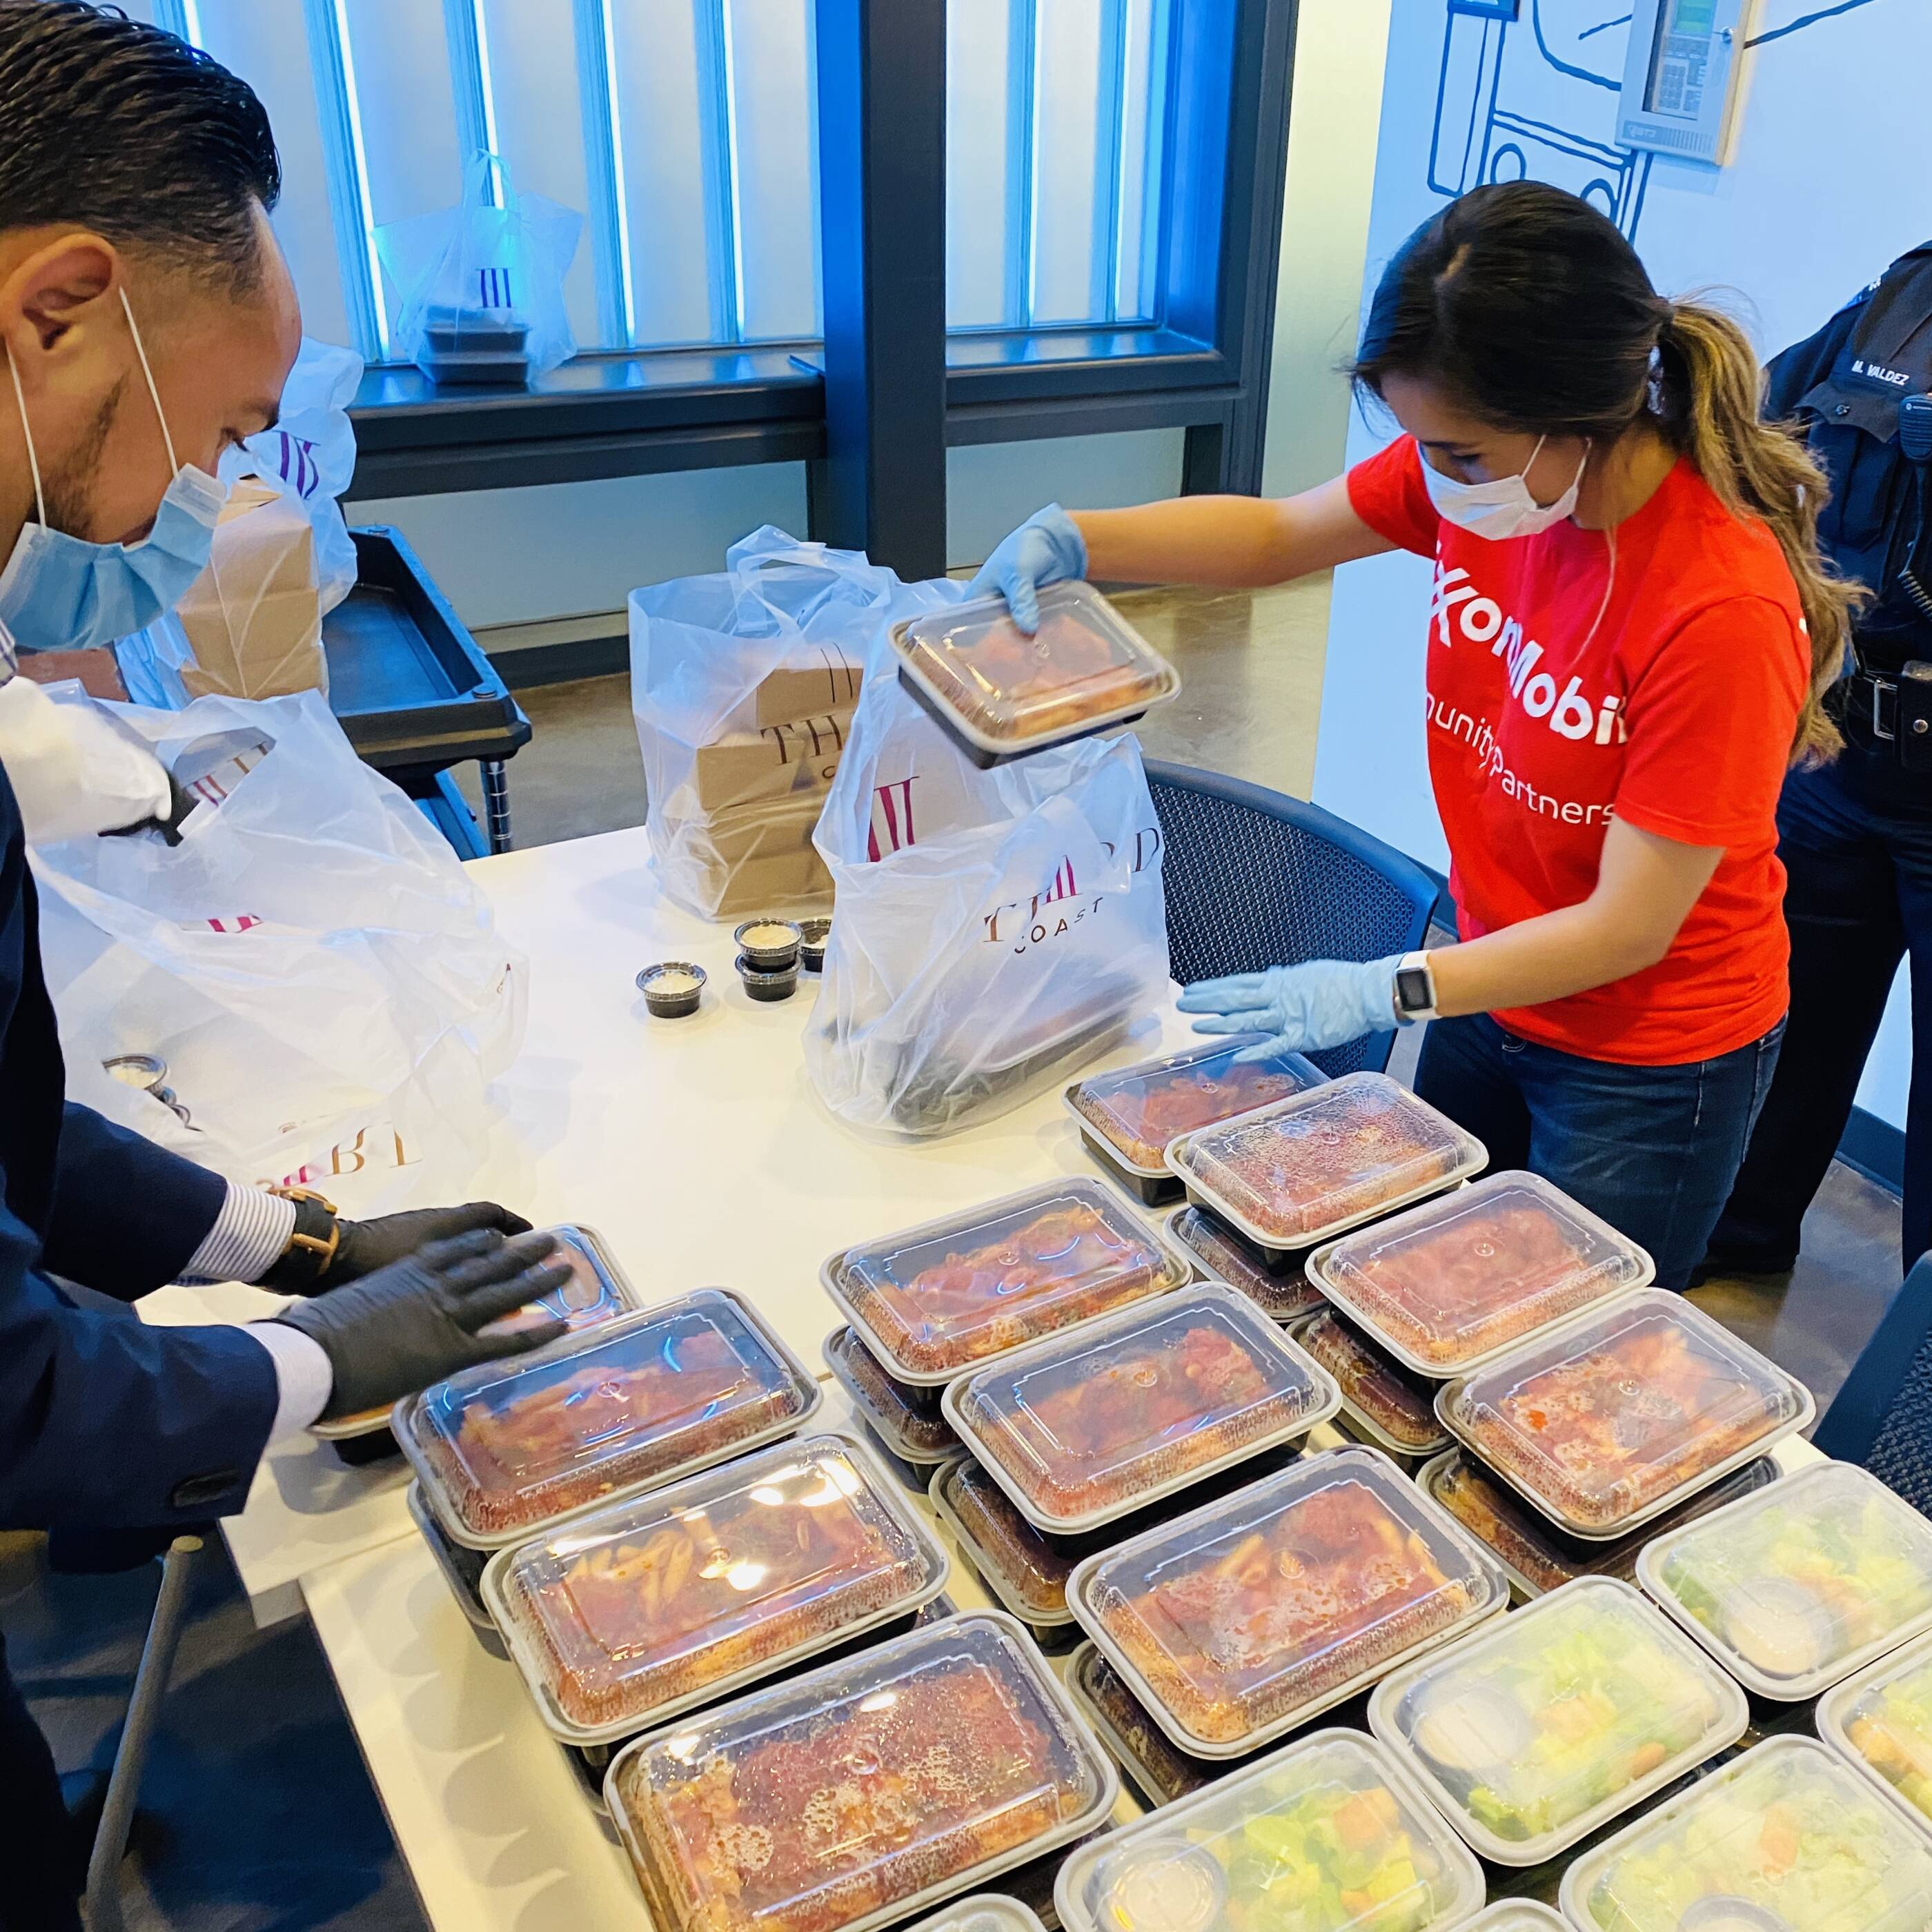 Image ExxonMobil volunteers worldwide helped distribute food to local communities affected by the COVID-19 pandemic.